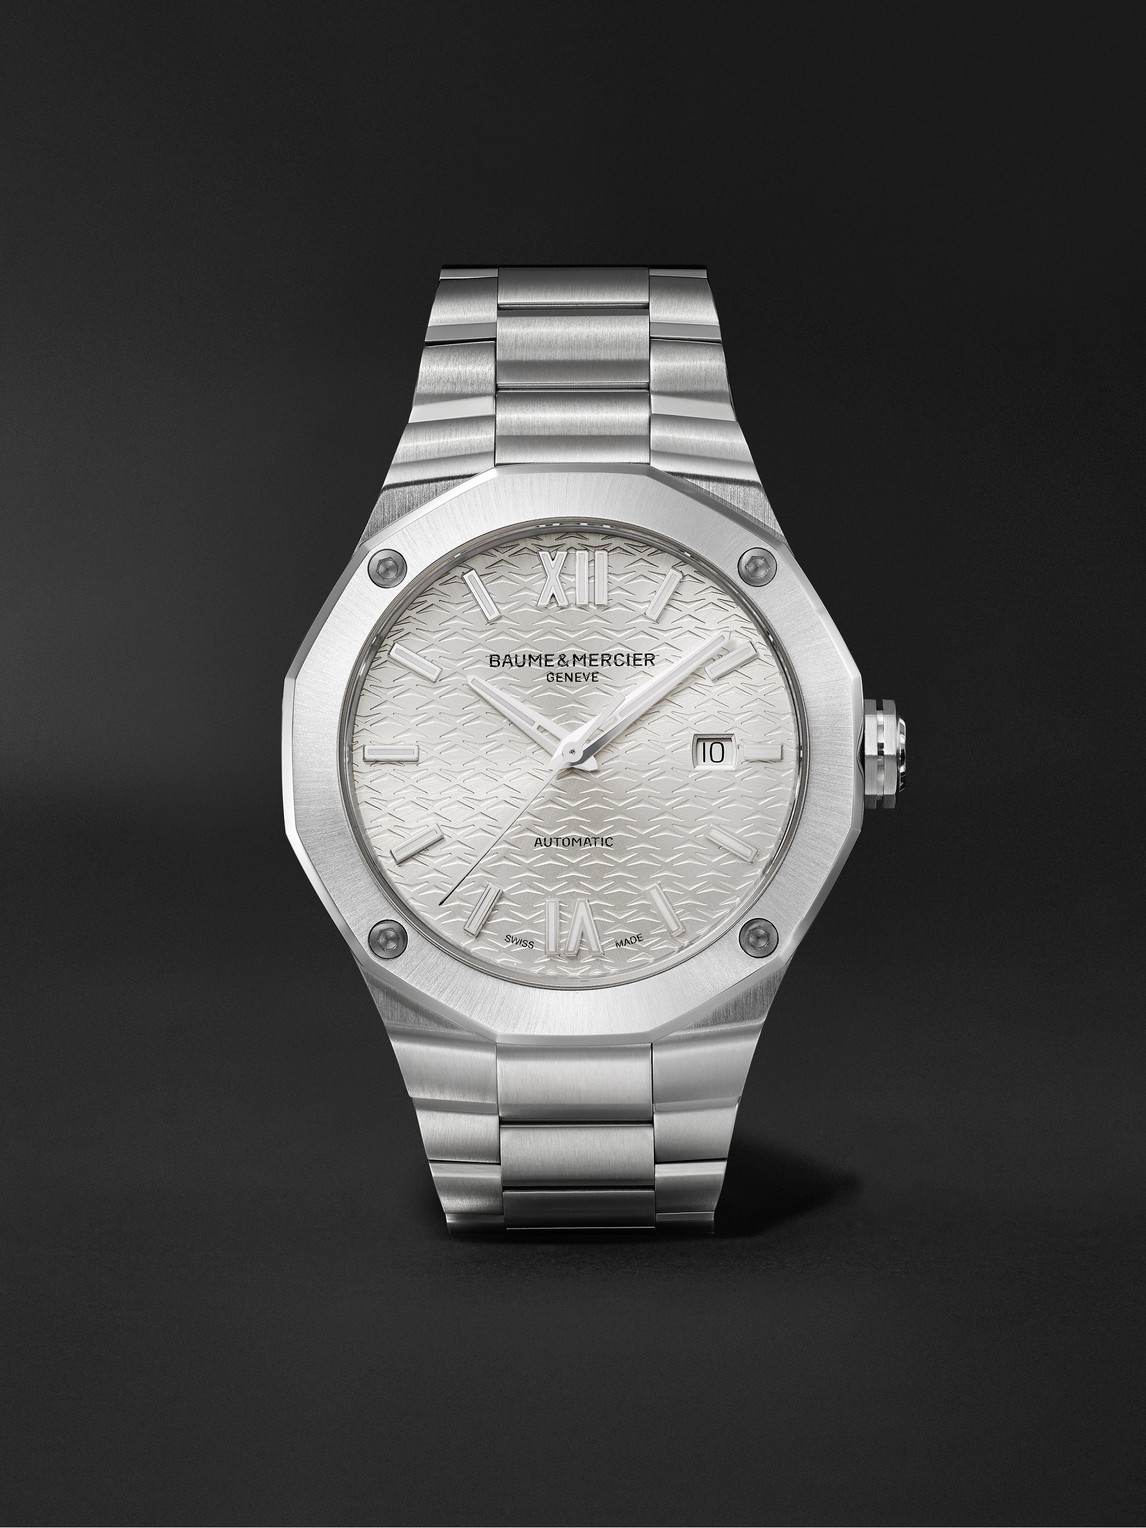 Baume & Mercier Riviera Automatic 42mm Stainless Steel Watch, Ref. No. M0a10622 In Silver